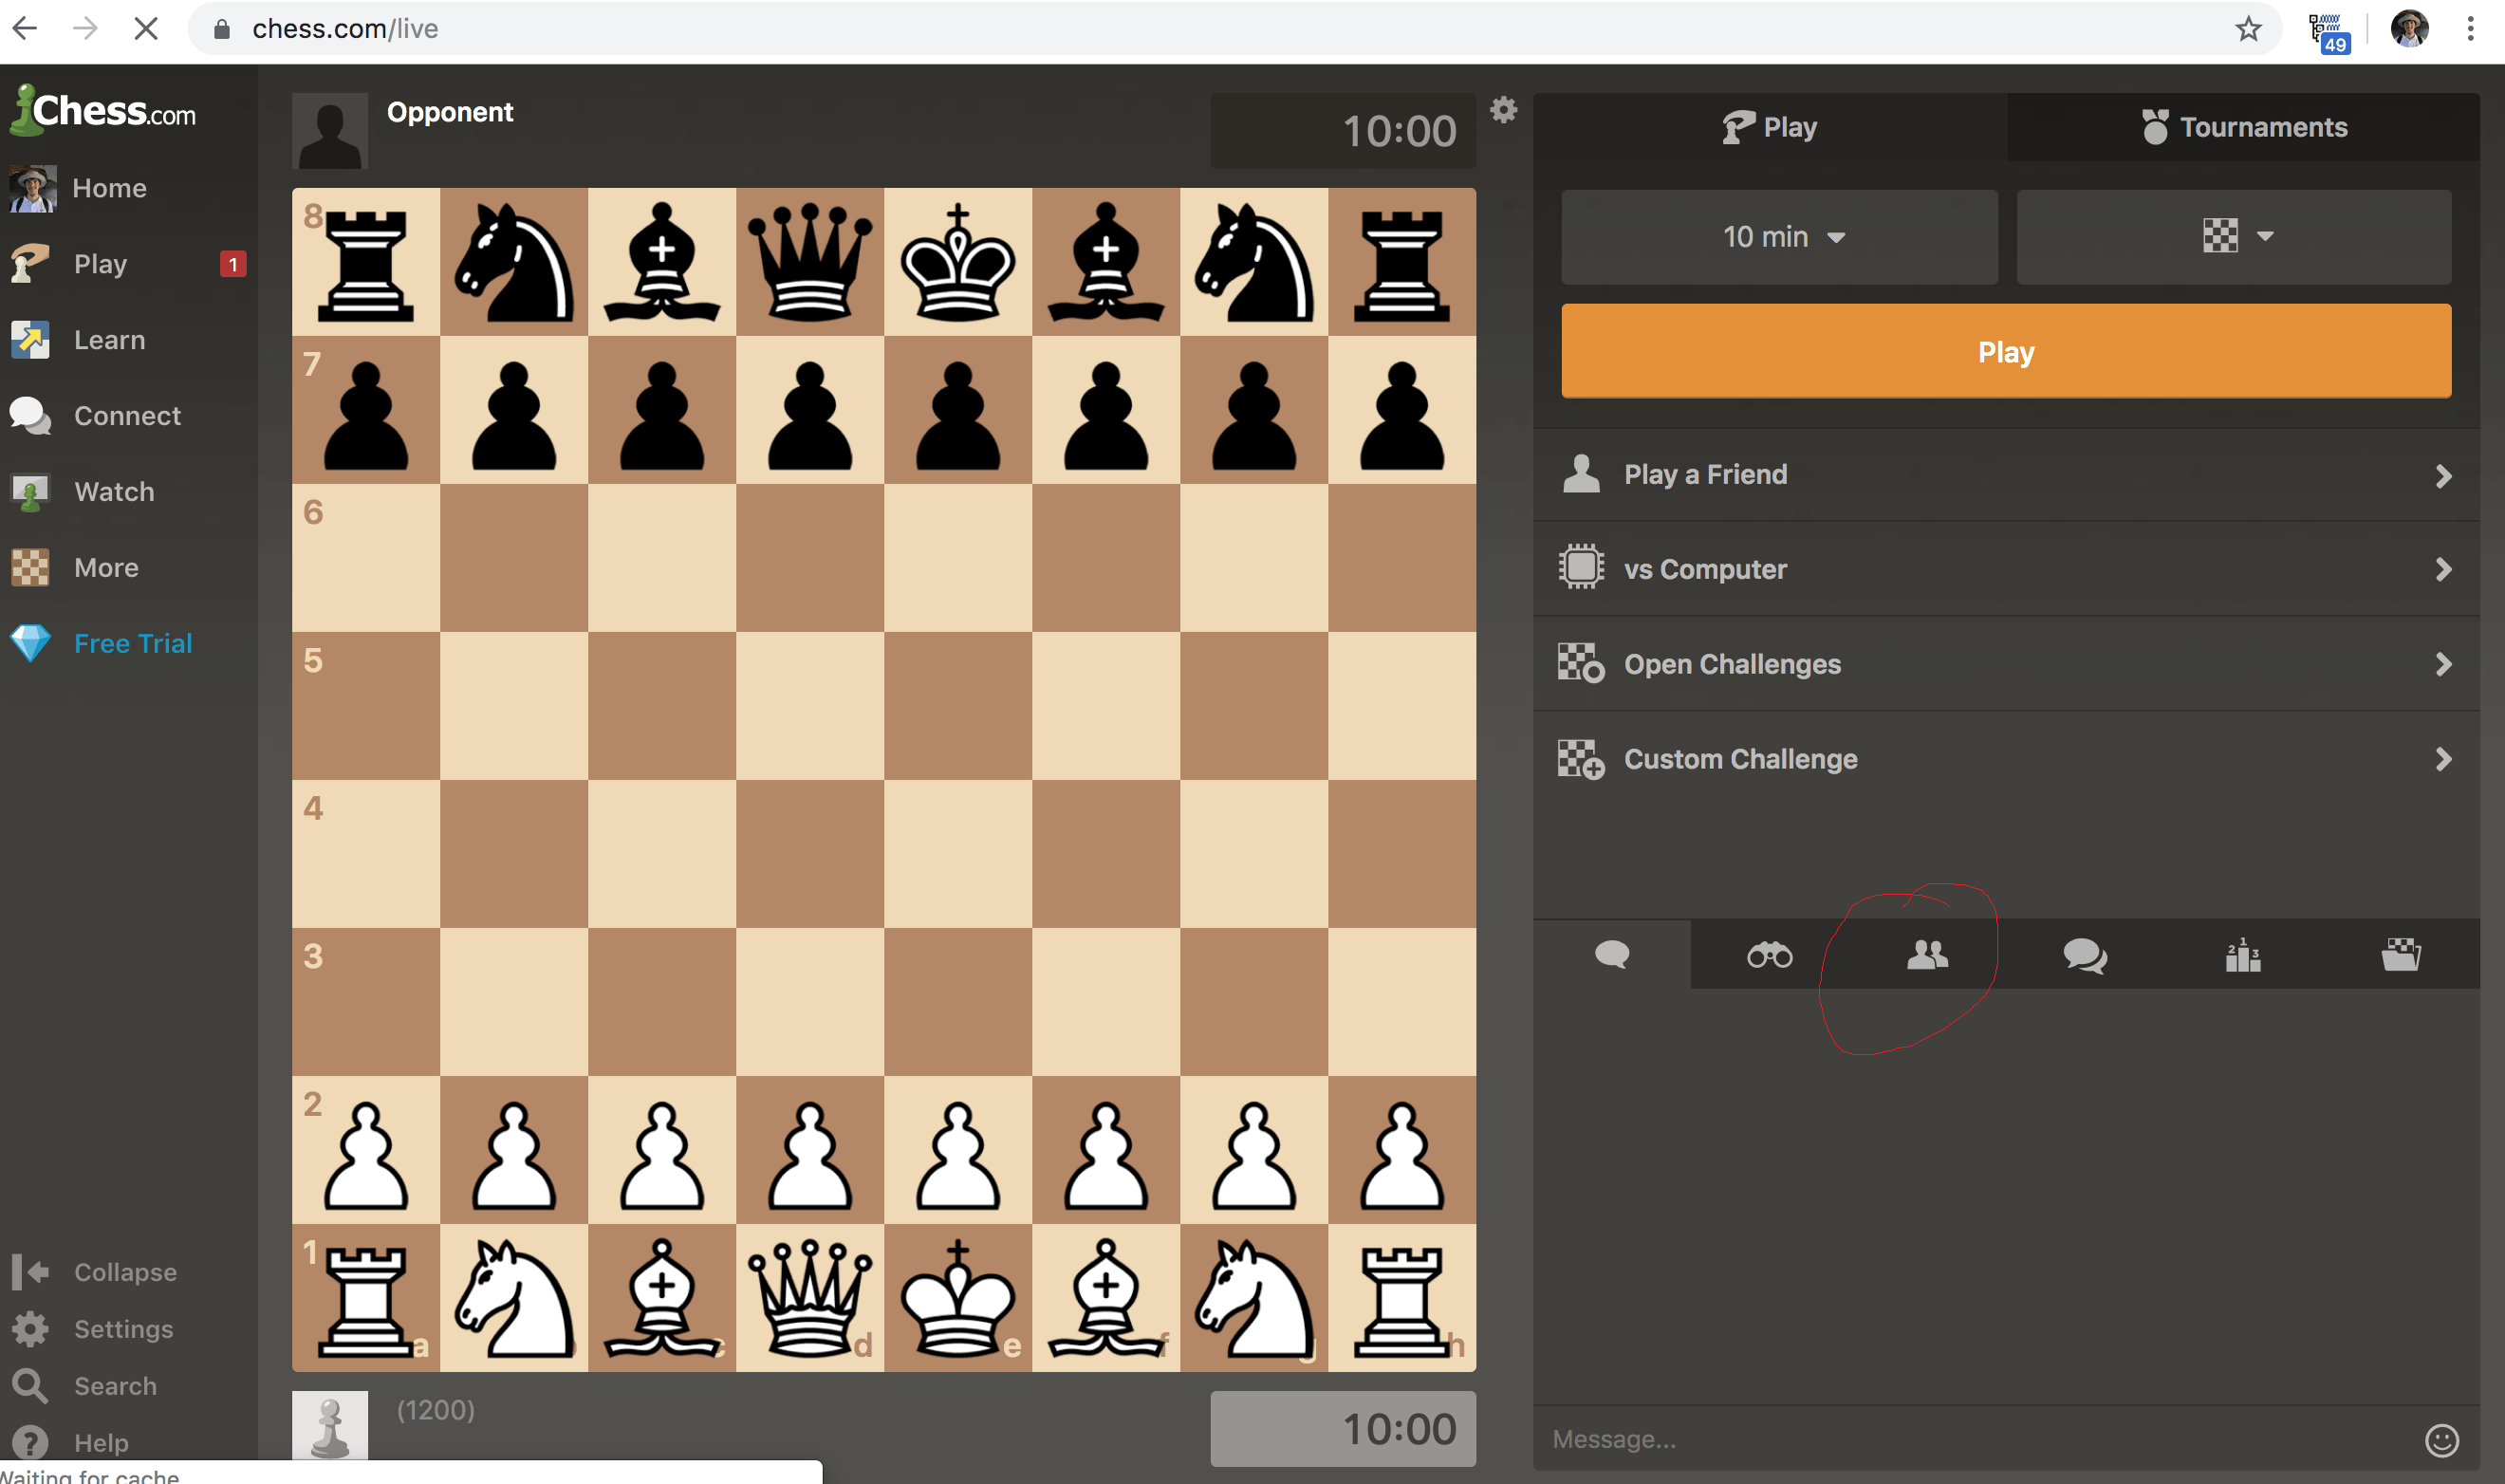 What is Guest Play? I can play without an account? - Chess.com